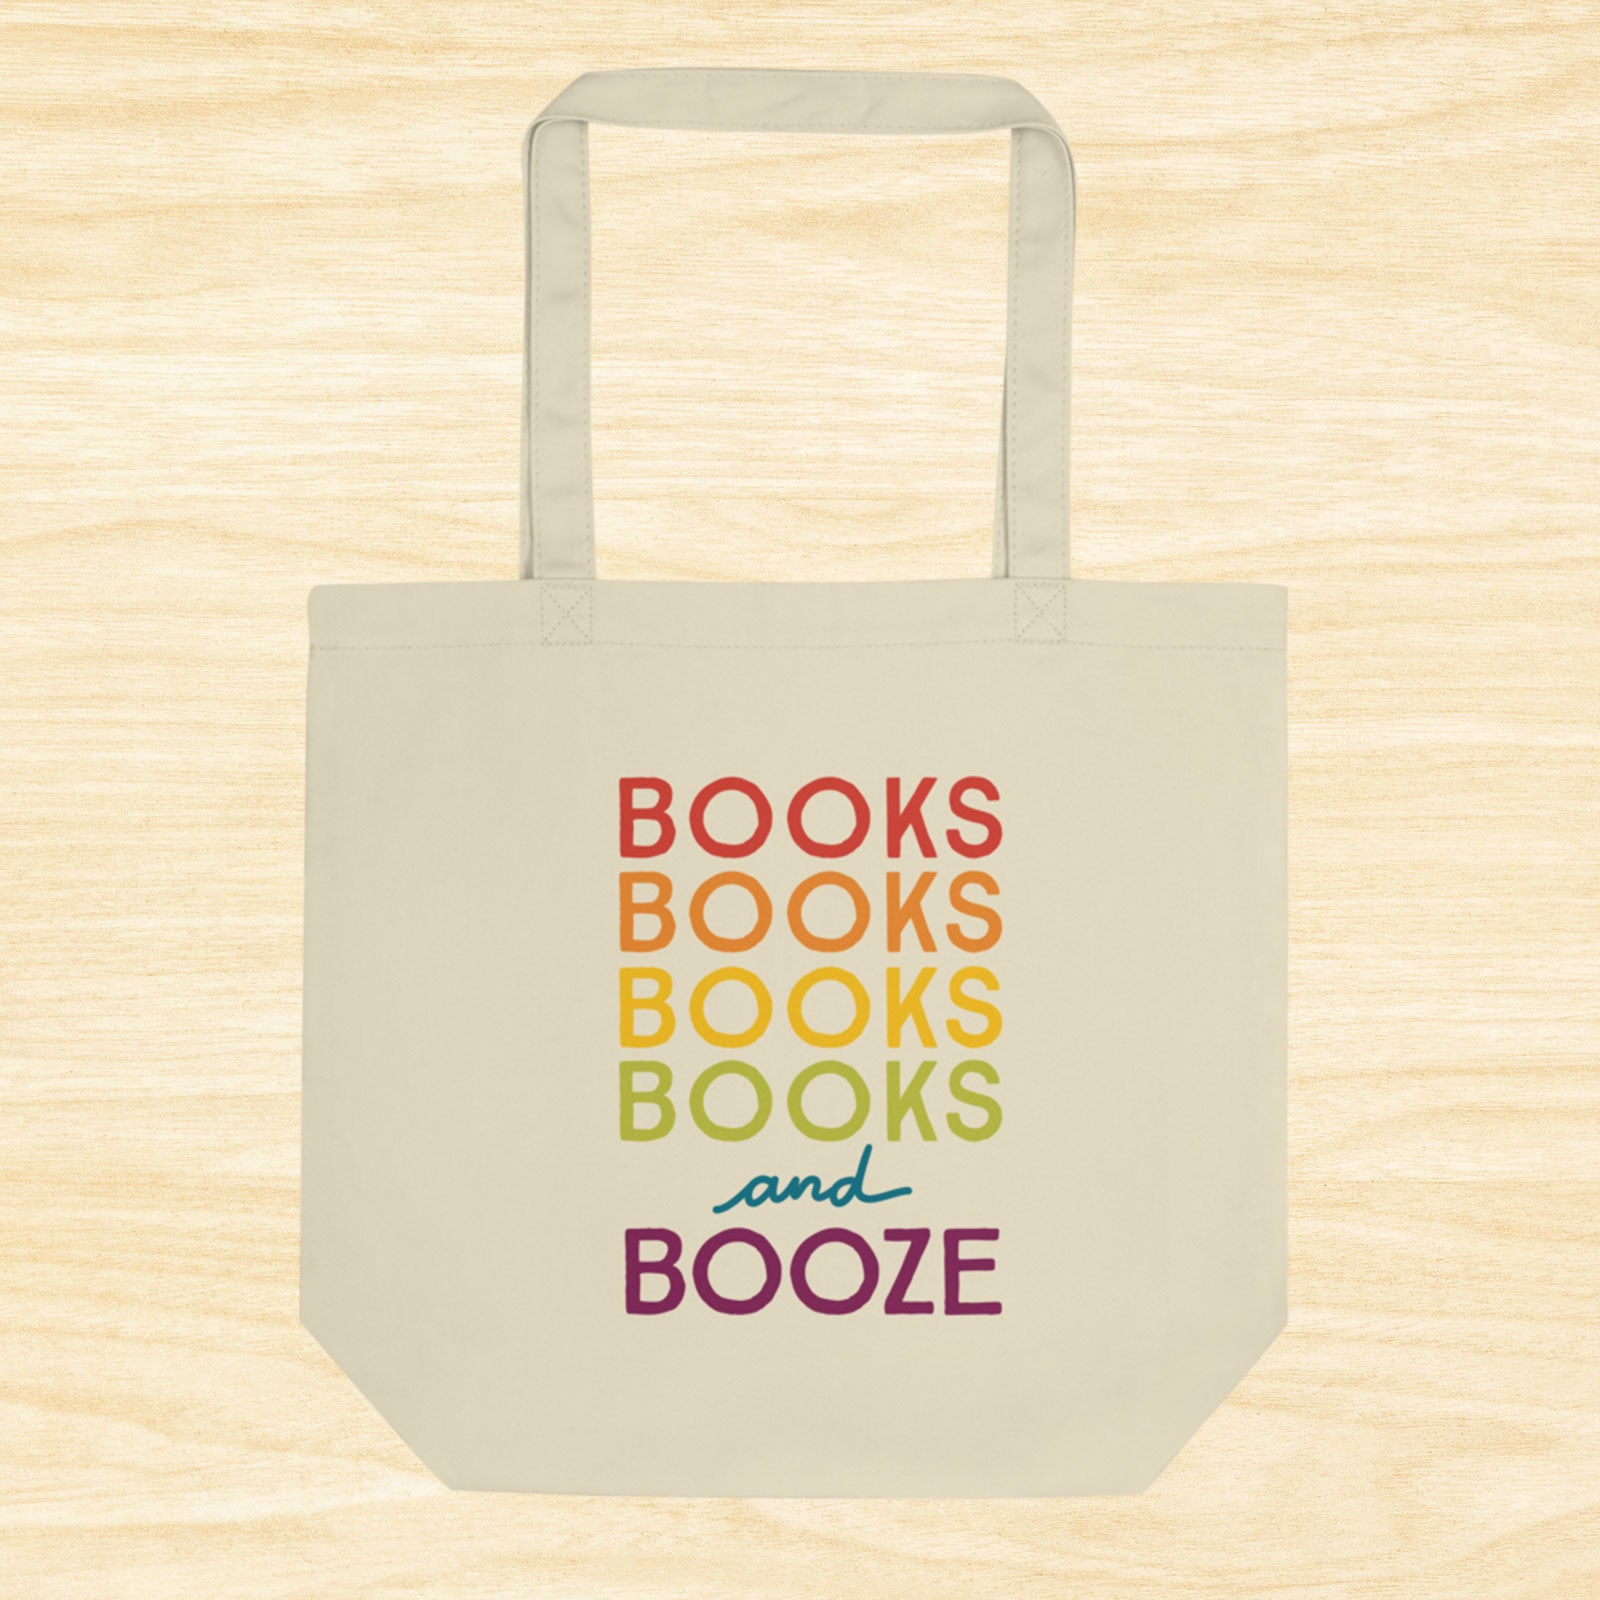 Cotton Tote Bag with the words "Books Books Books Books and Booze" on it